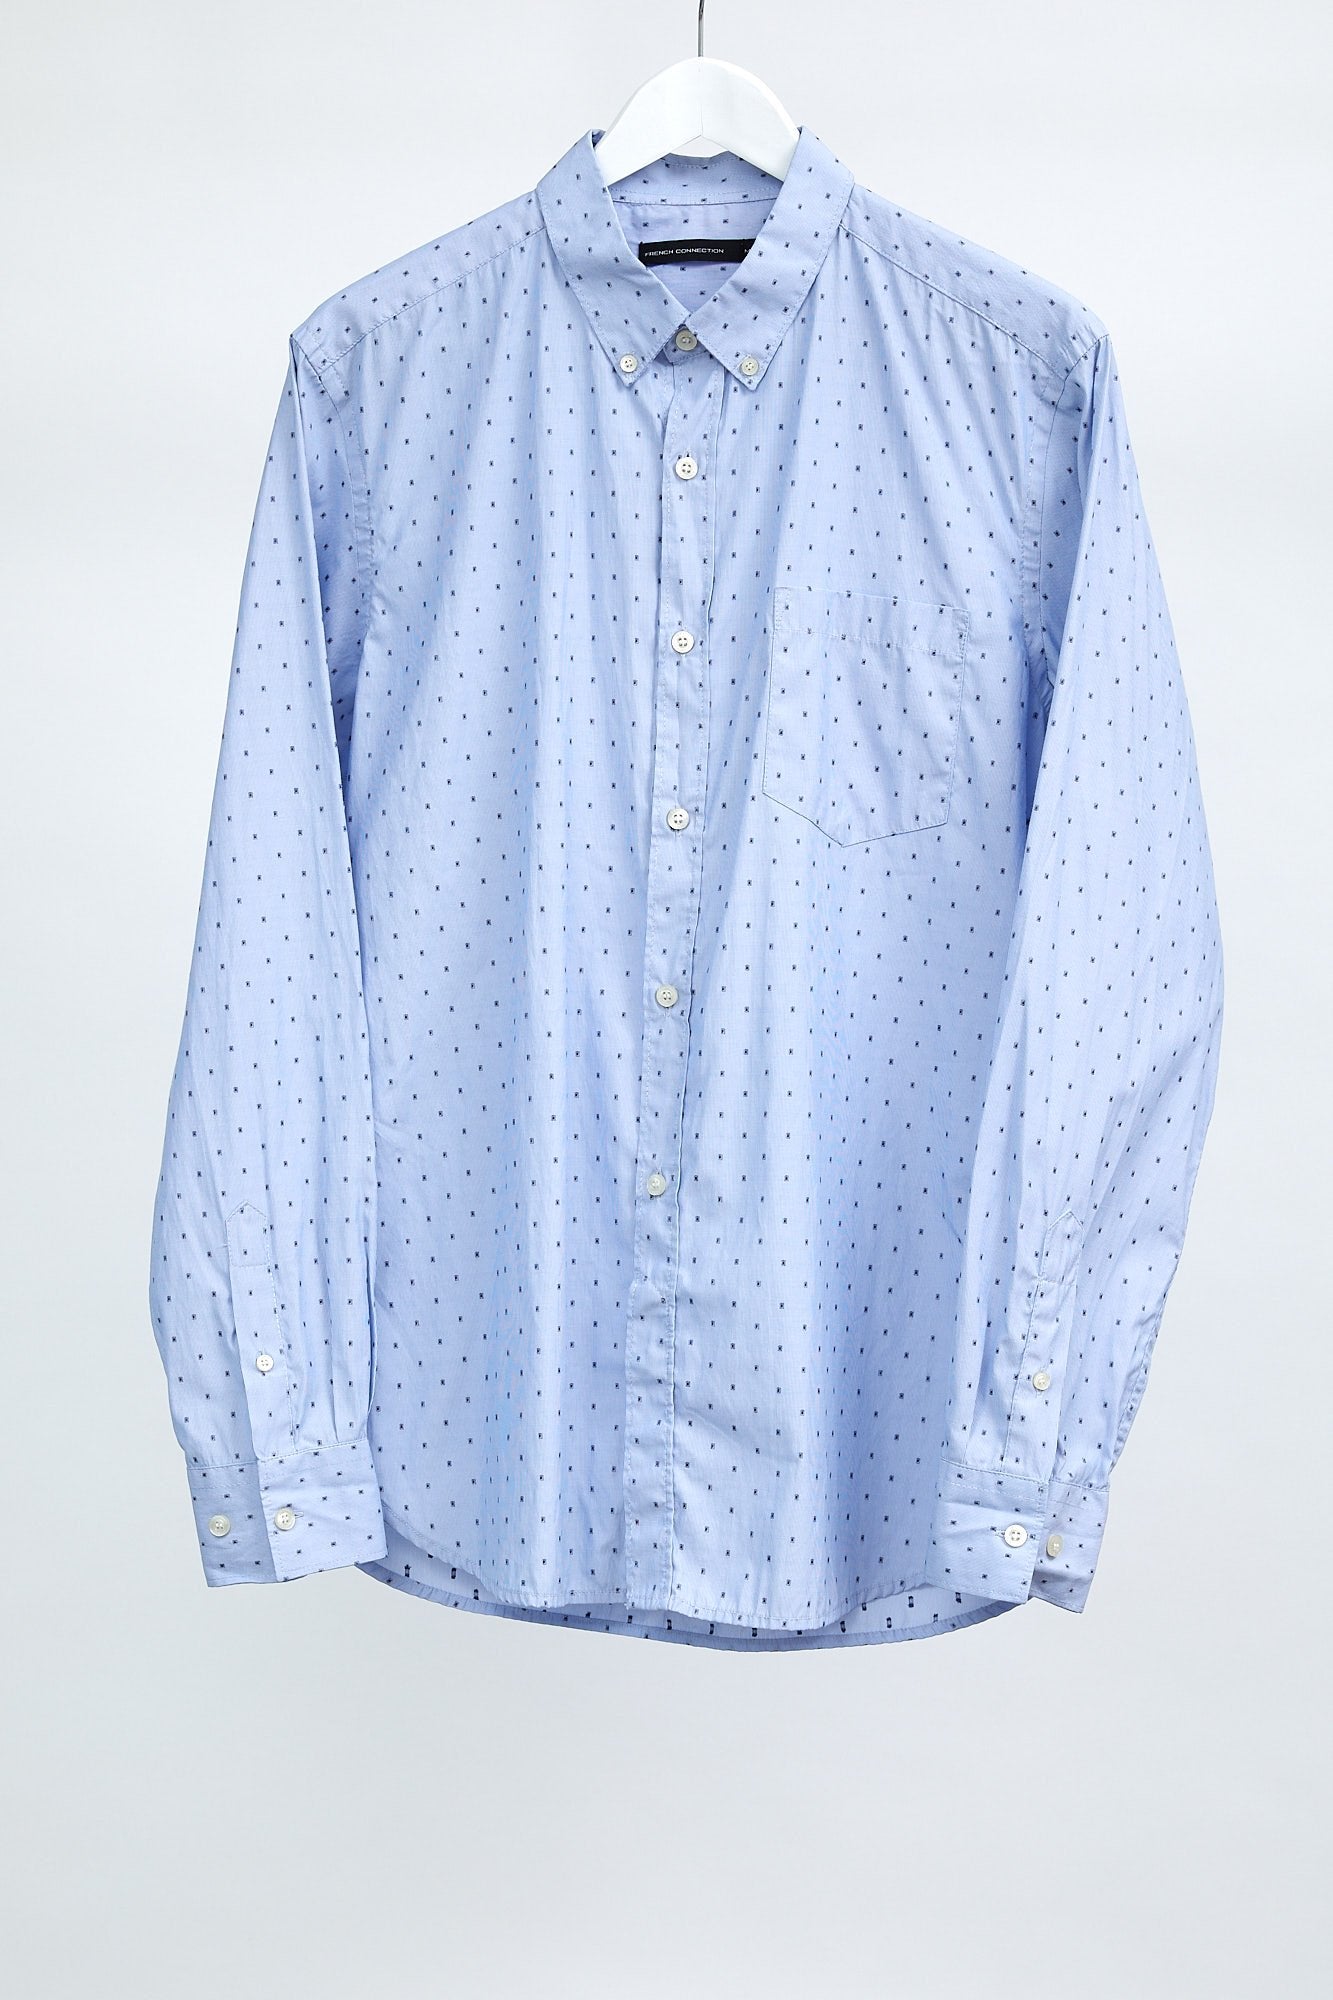 Mens French Connection Blue Spot Shirt: Size Medium